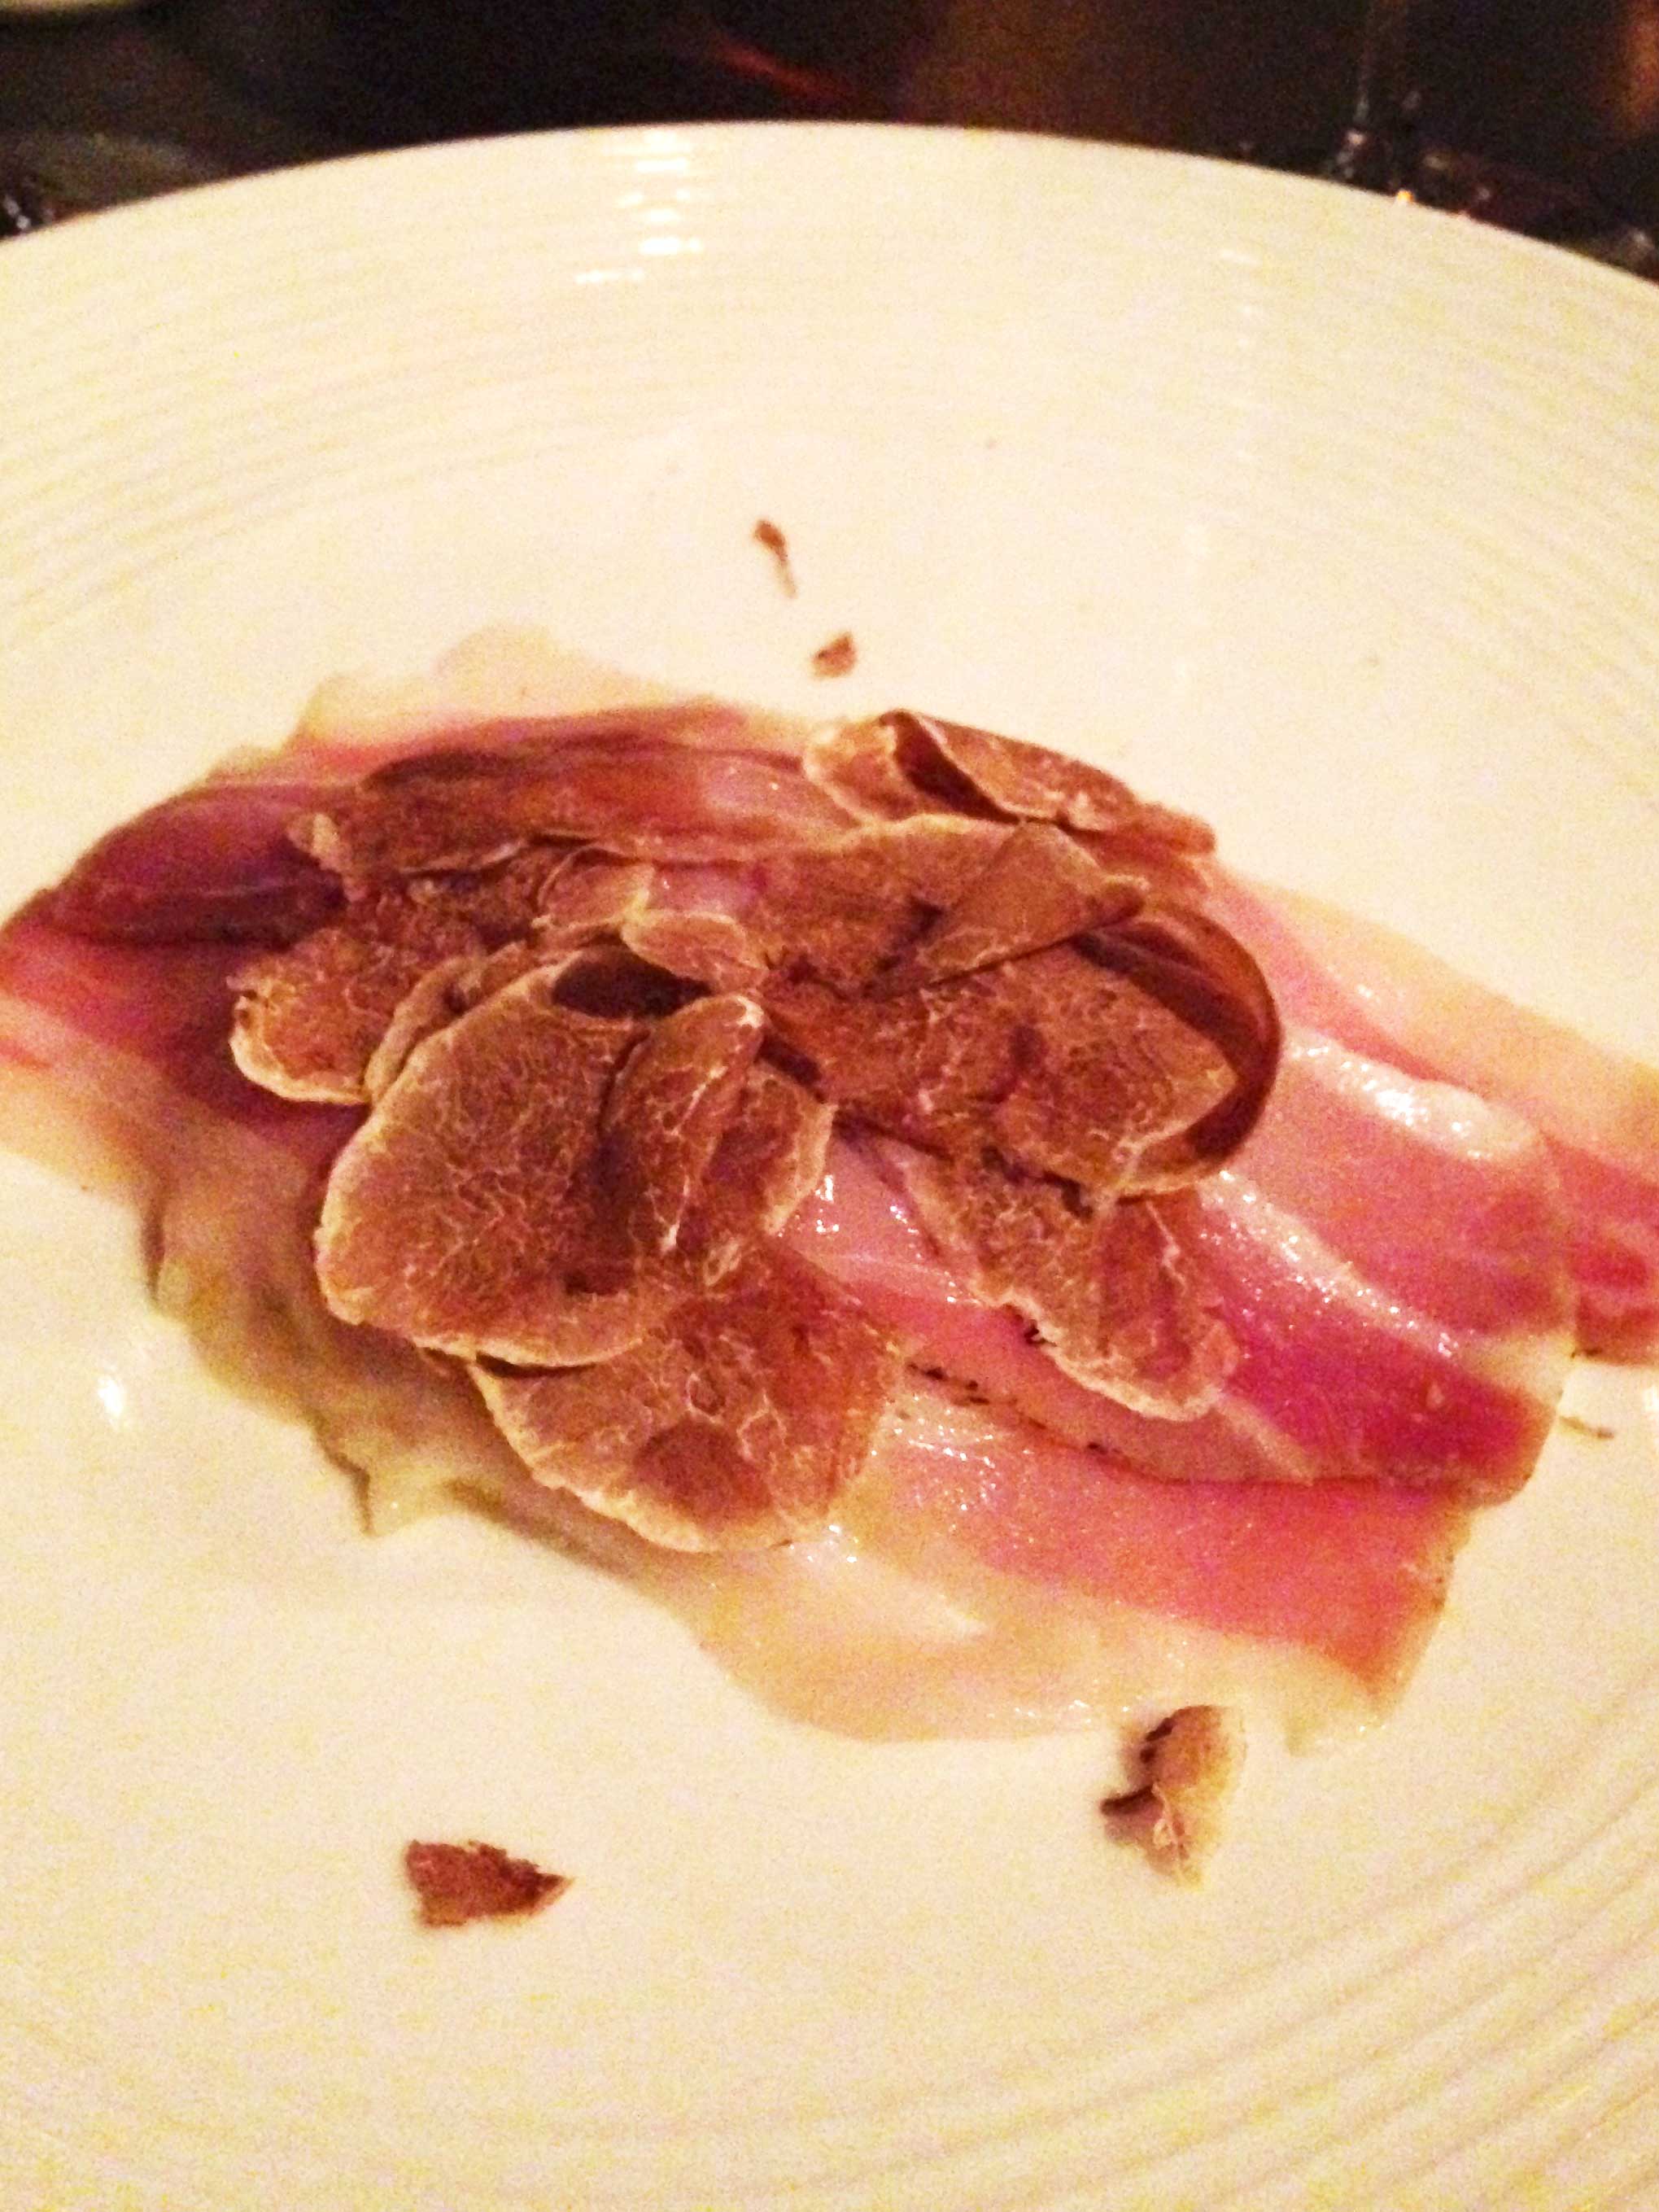 White truffles and pancetta atop risotto